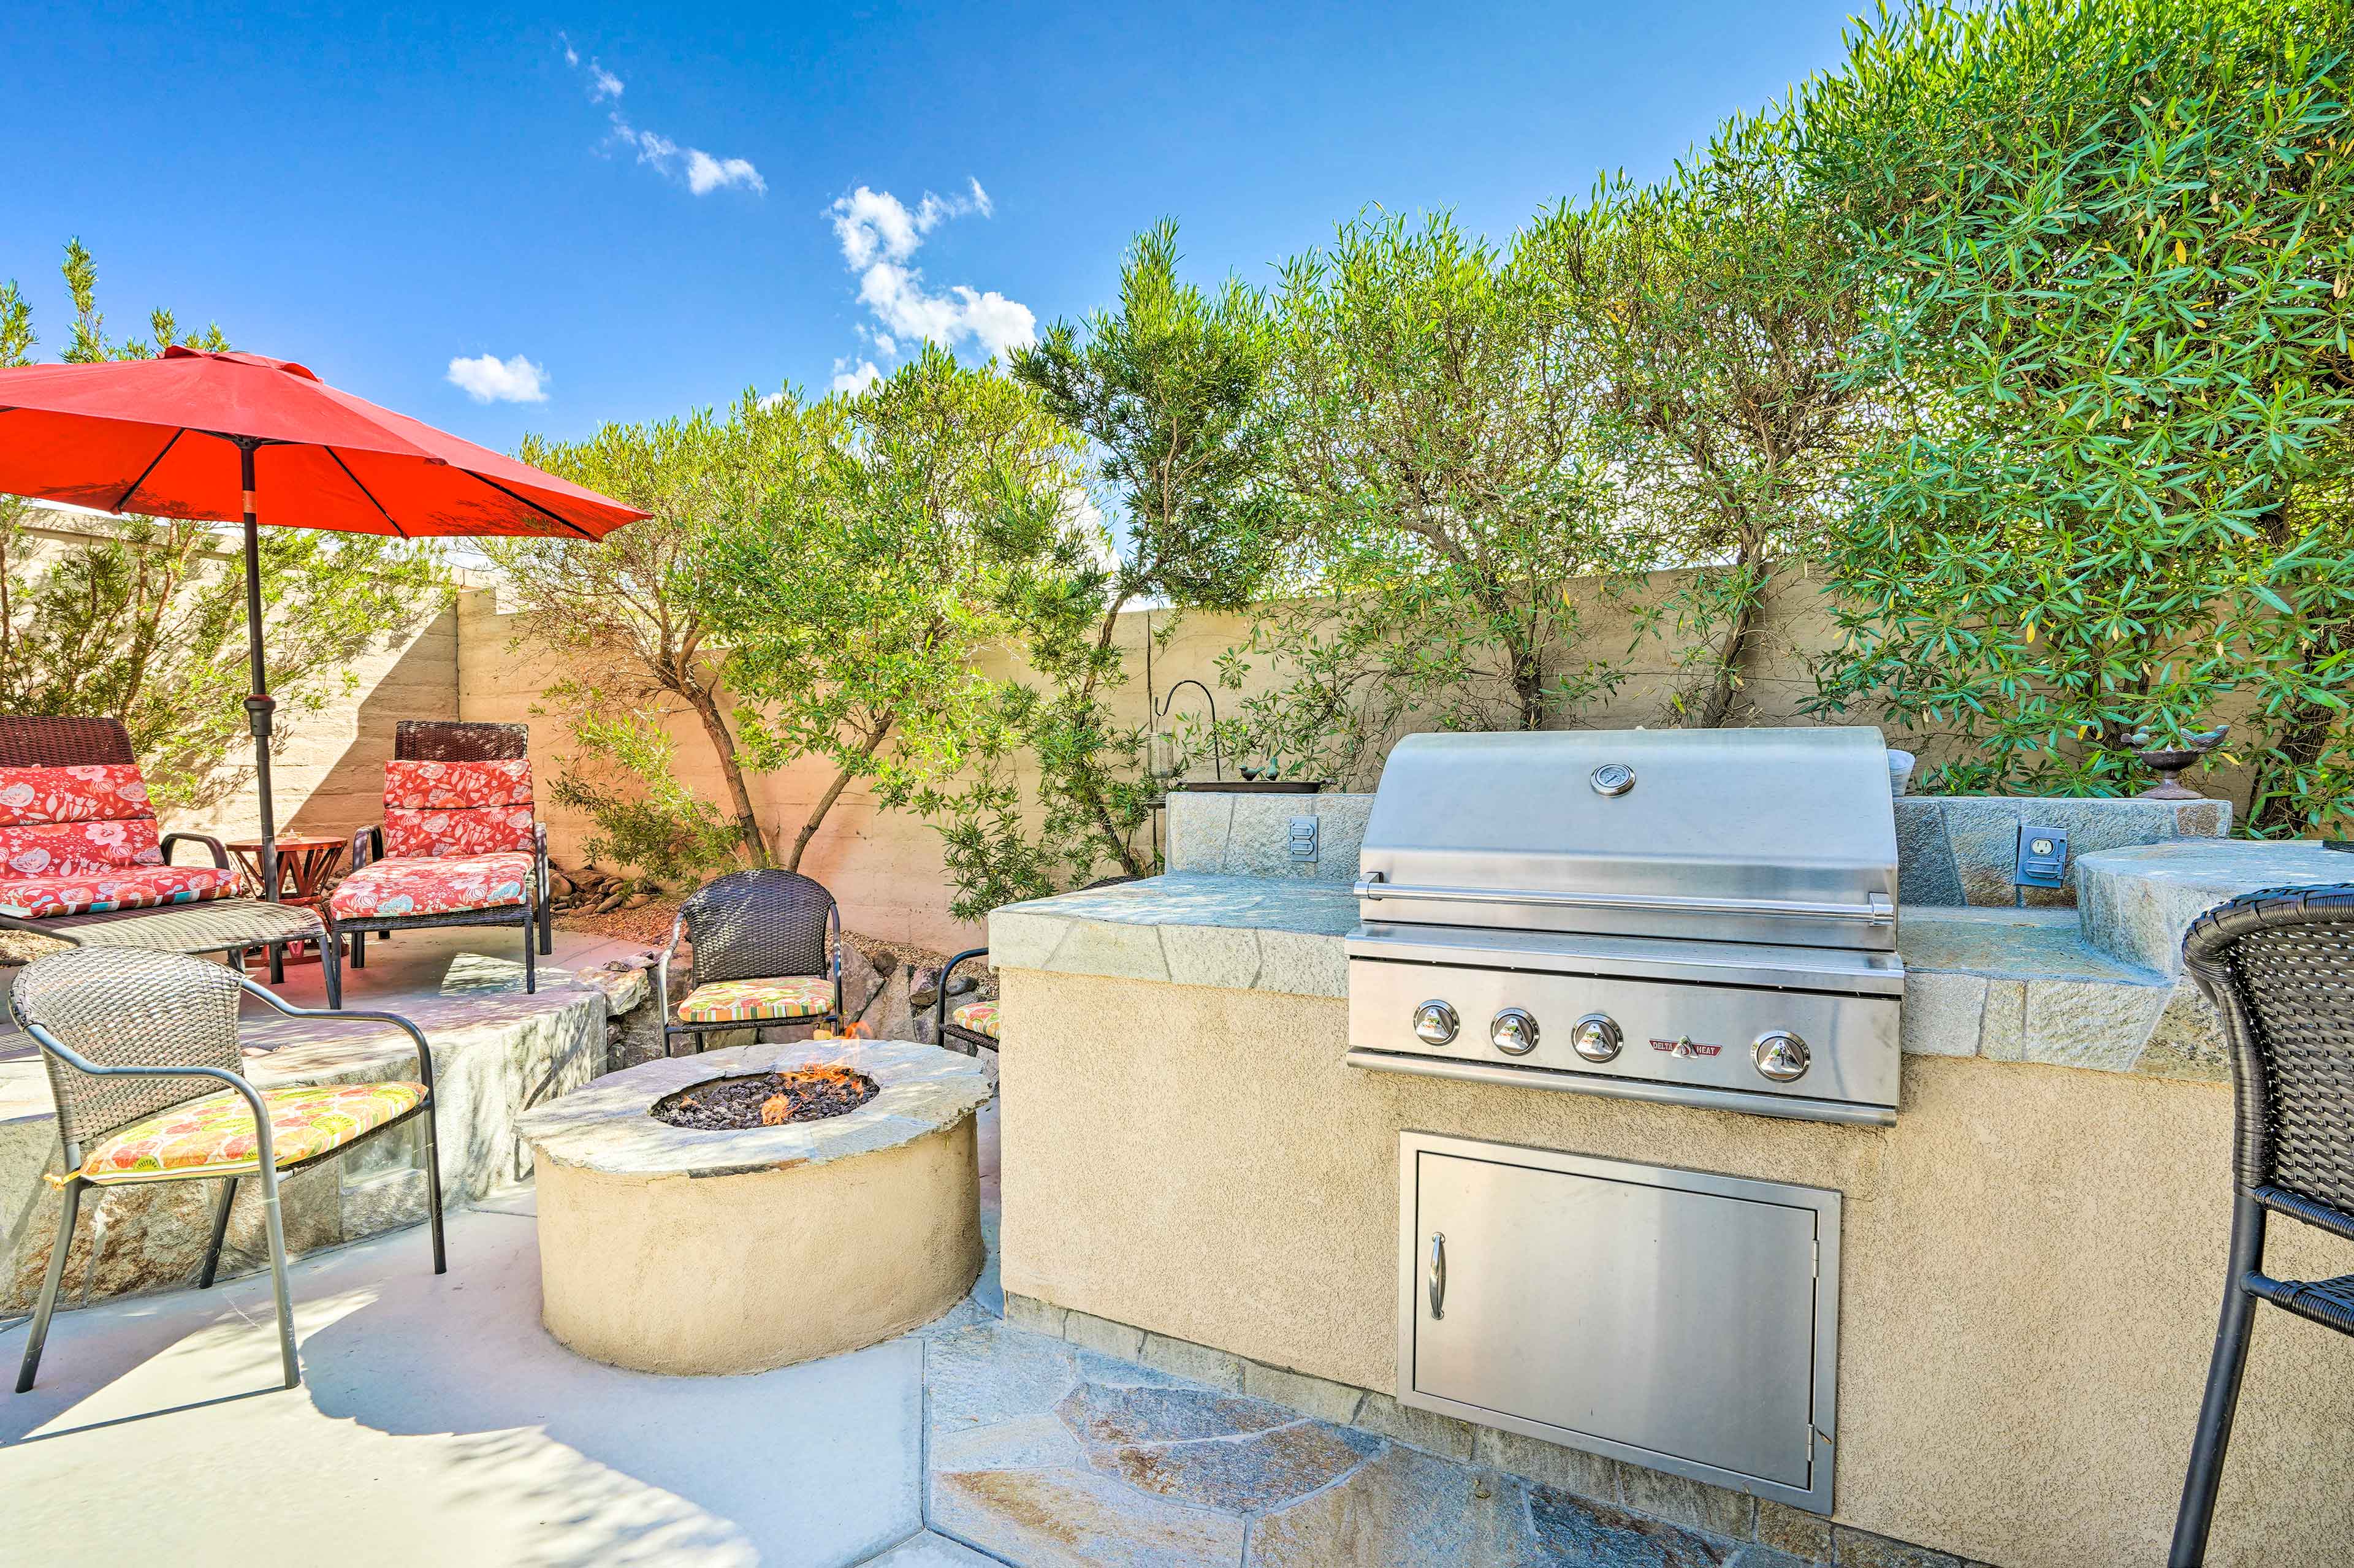 Patio | Gas Fire Pit | Gas Grill